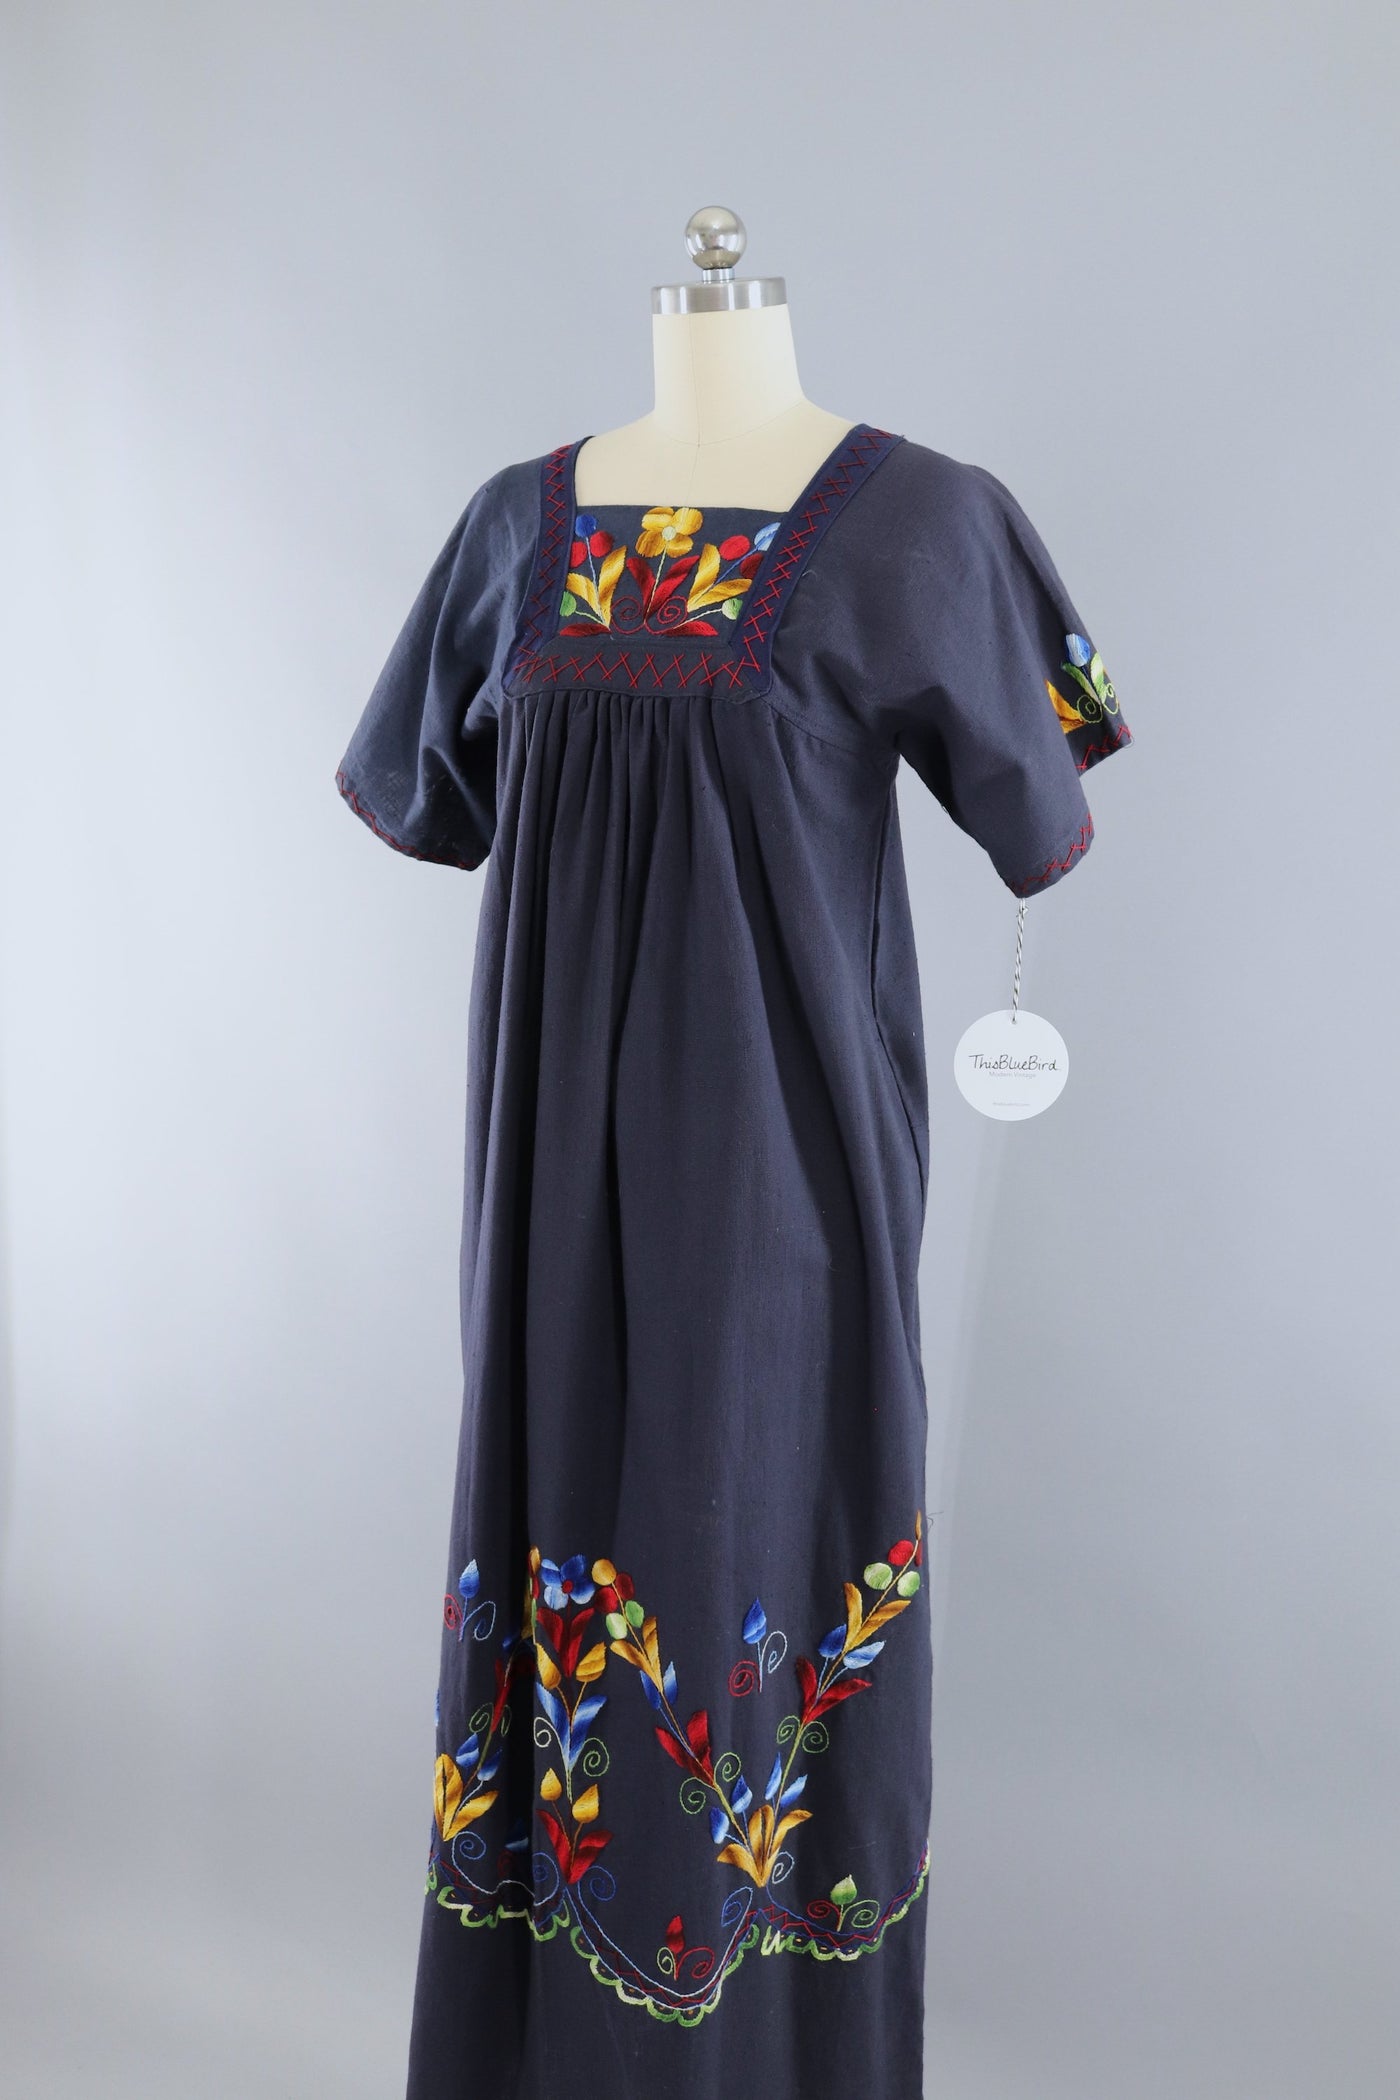 Vintage Mexican Caftan Dress / Navy Blue Floral Embroidery - ThisBlueBird